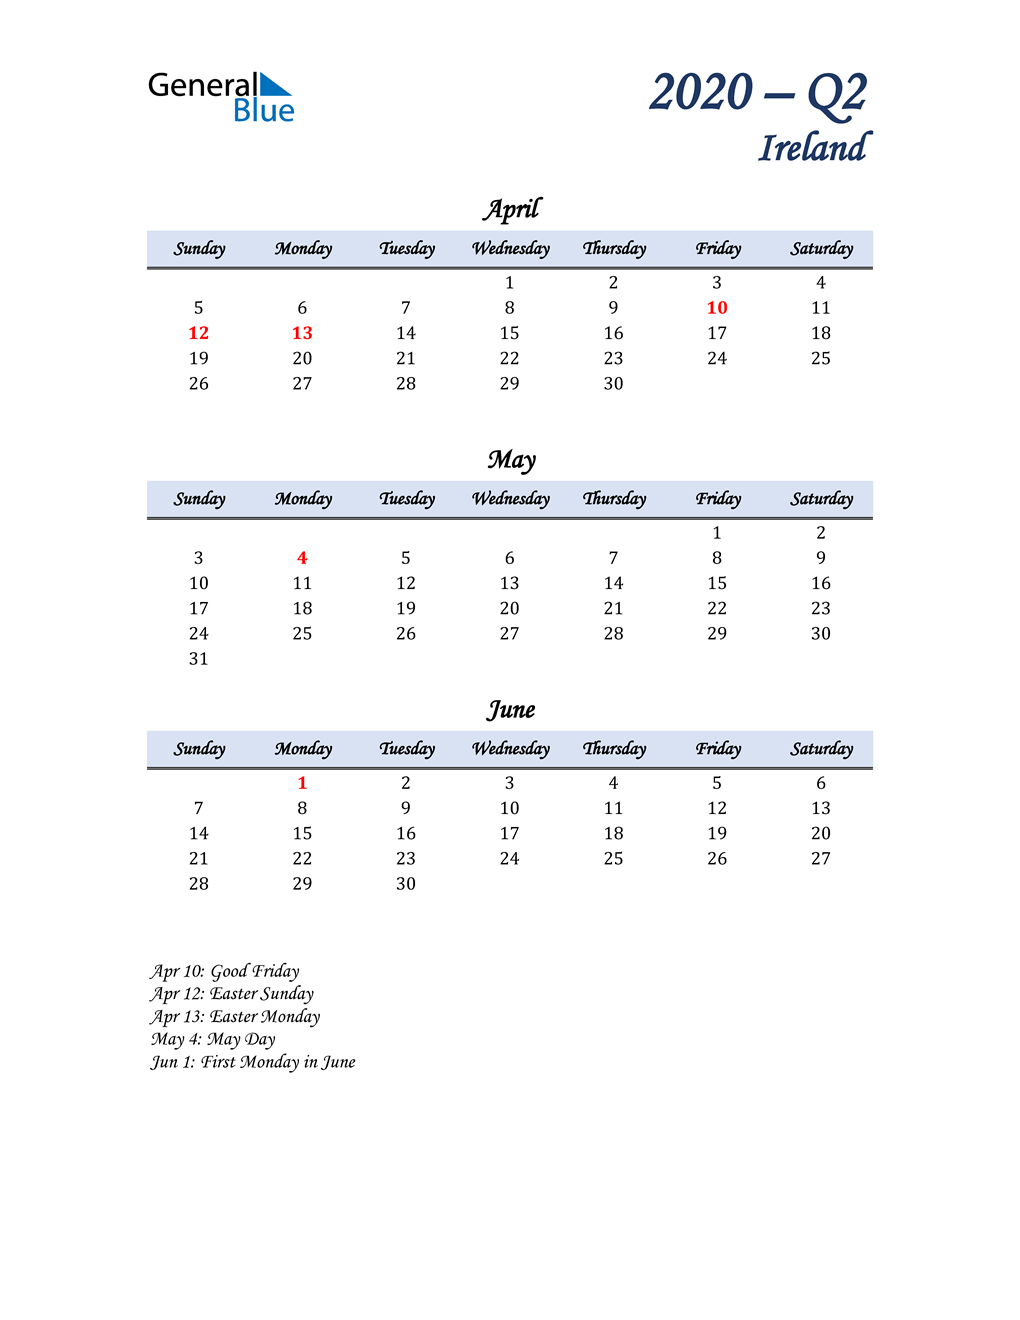  April, May, and June Calendar for Ireland